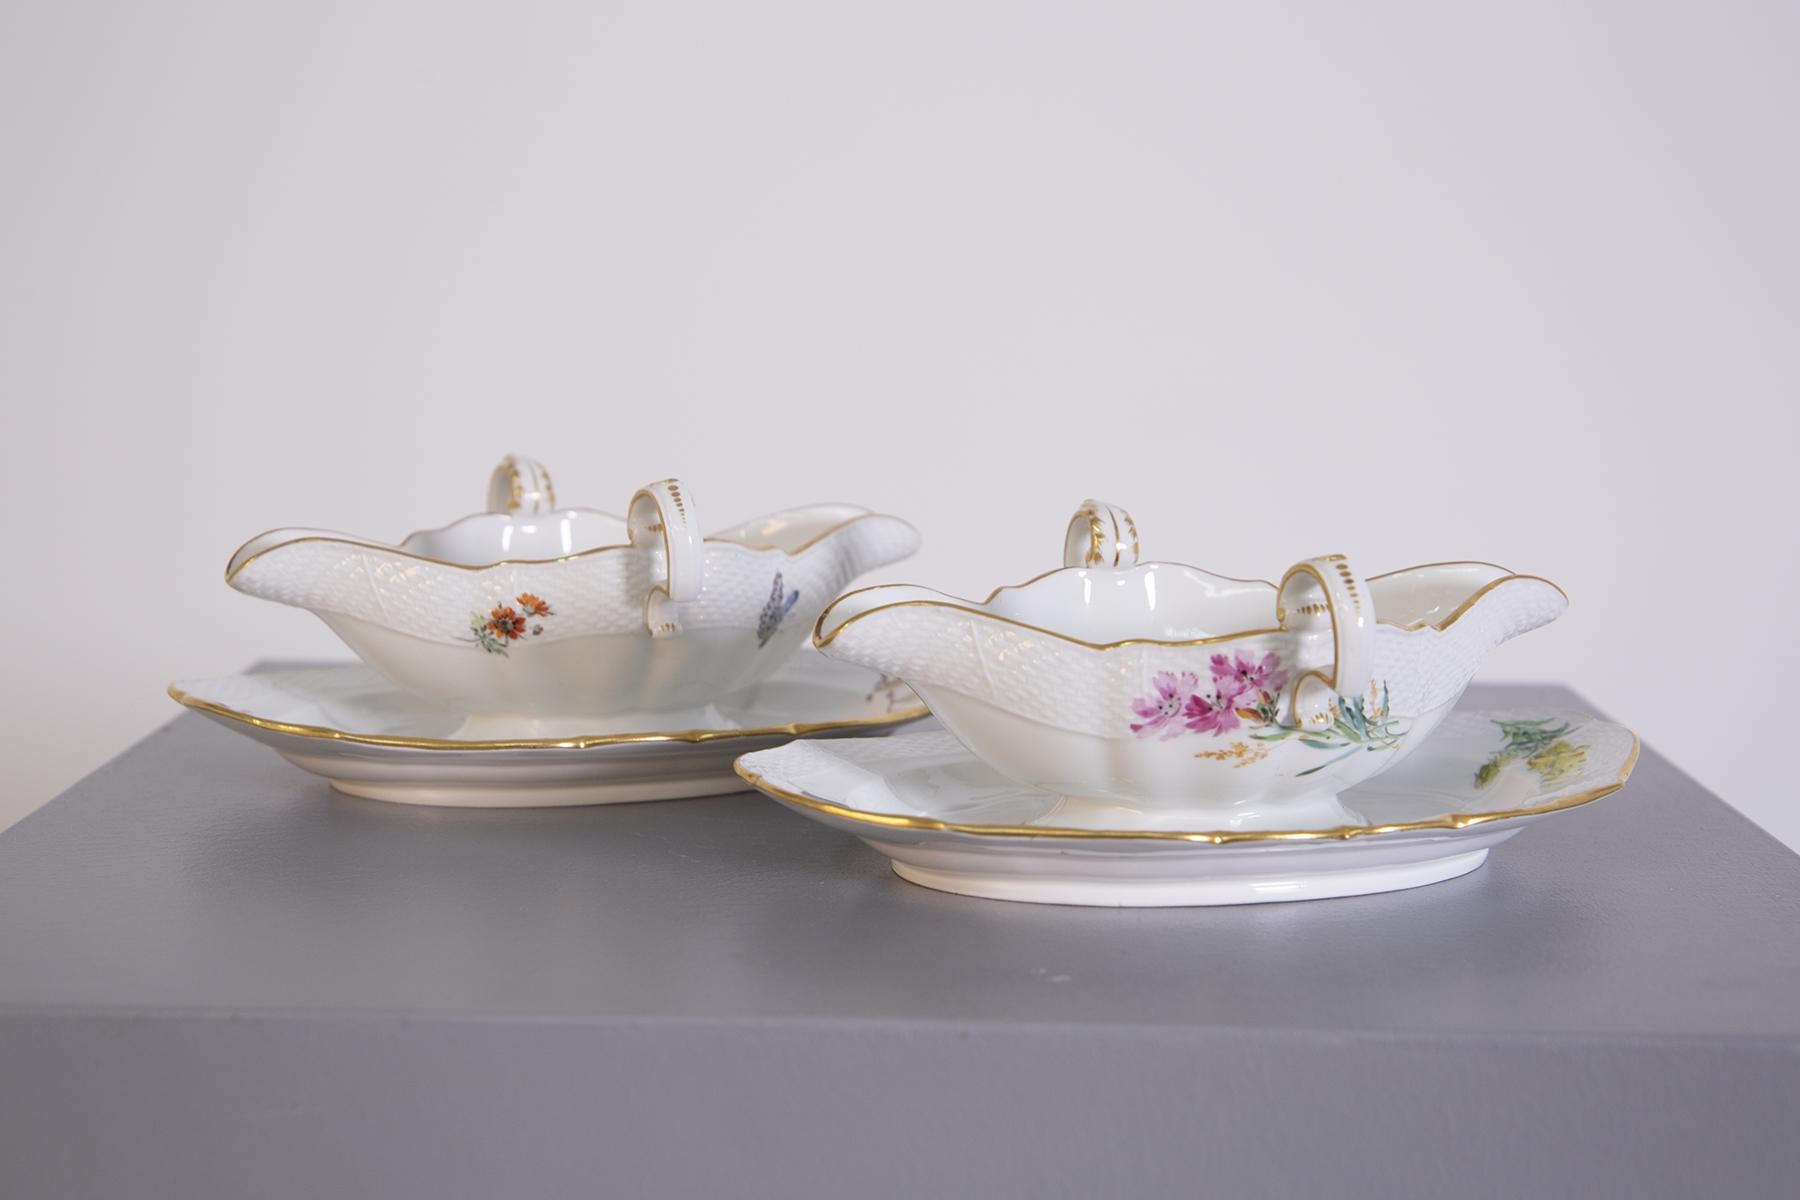 Pair of Meissen Legume Dishes from the Marcolini Period, 18th Century For Sale 1